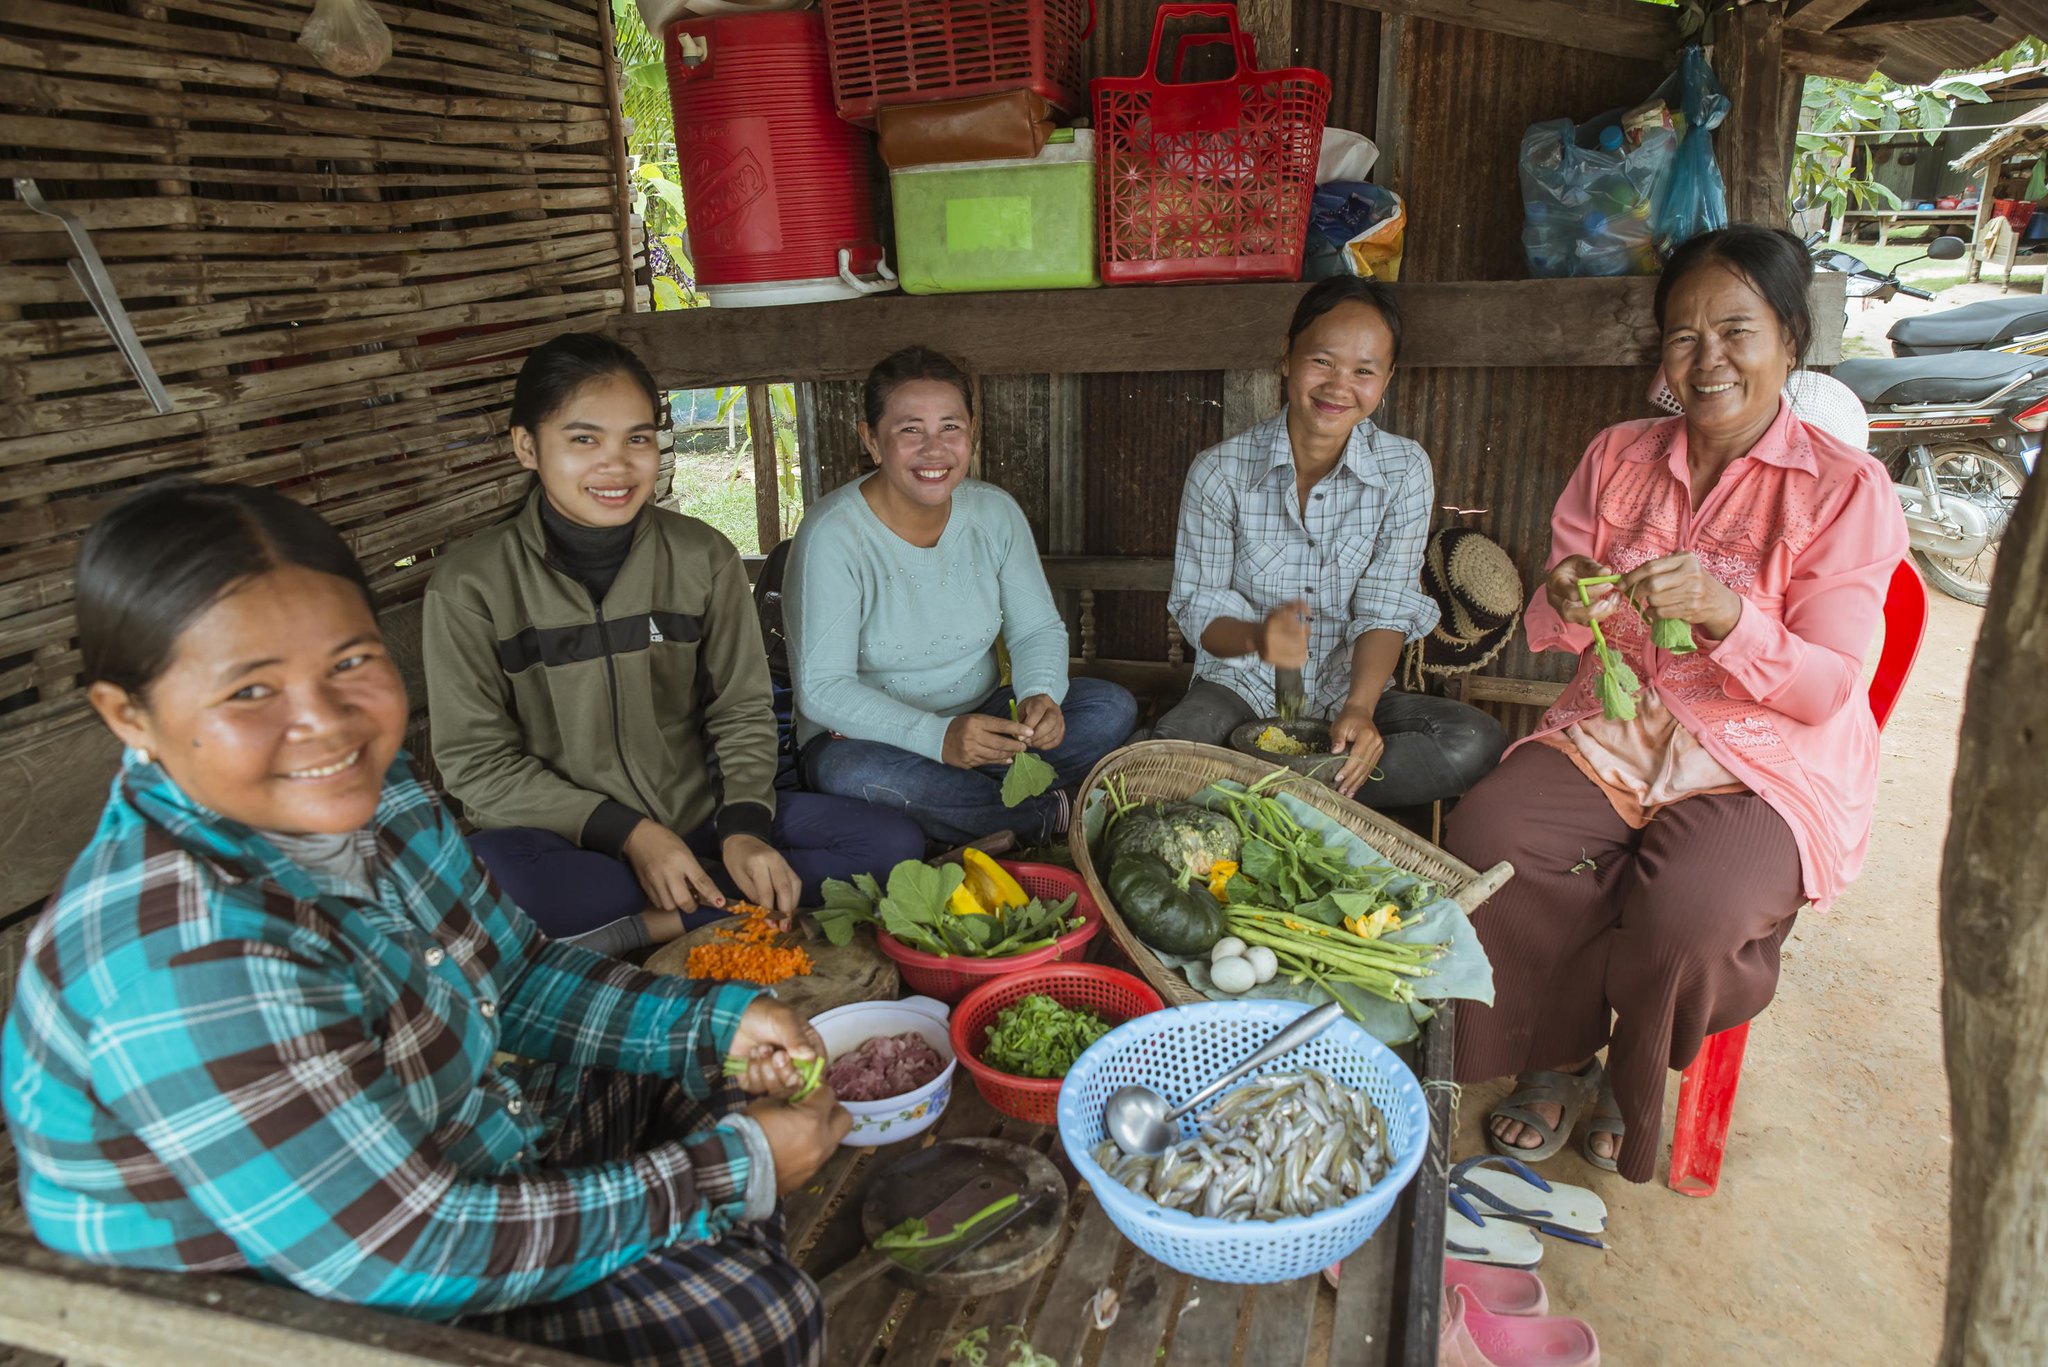 Villagers gather vegetables and fish to prepare a nutritious and healthy meal for the community children in Battambang, Cambodia. Photo by Fani Llauradó.